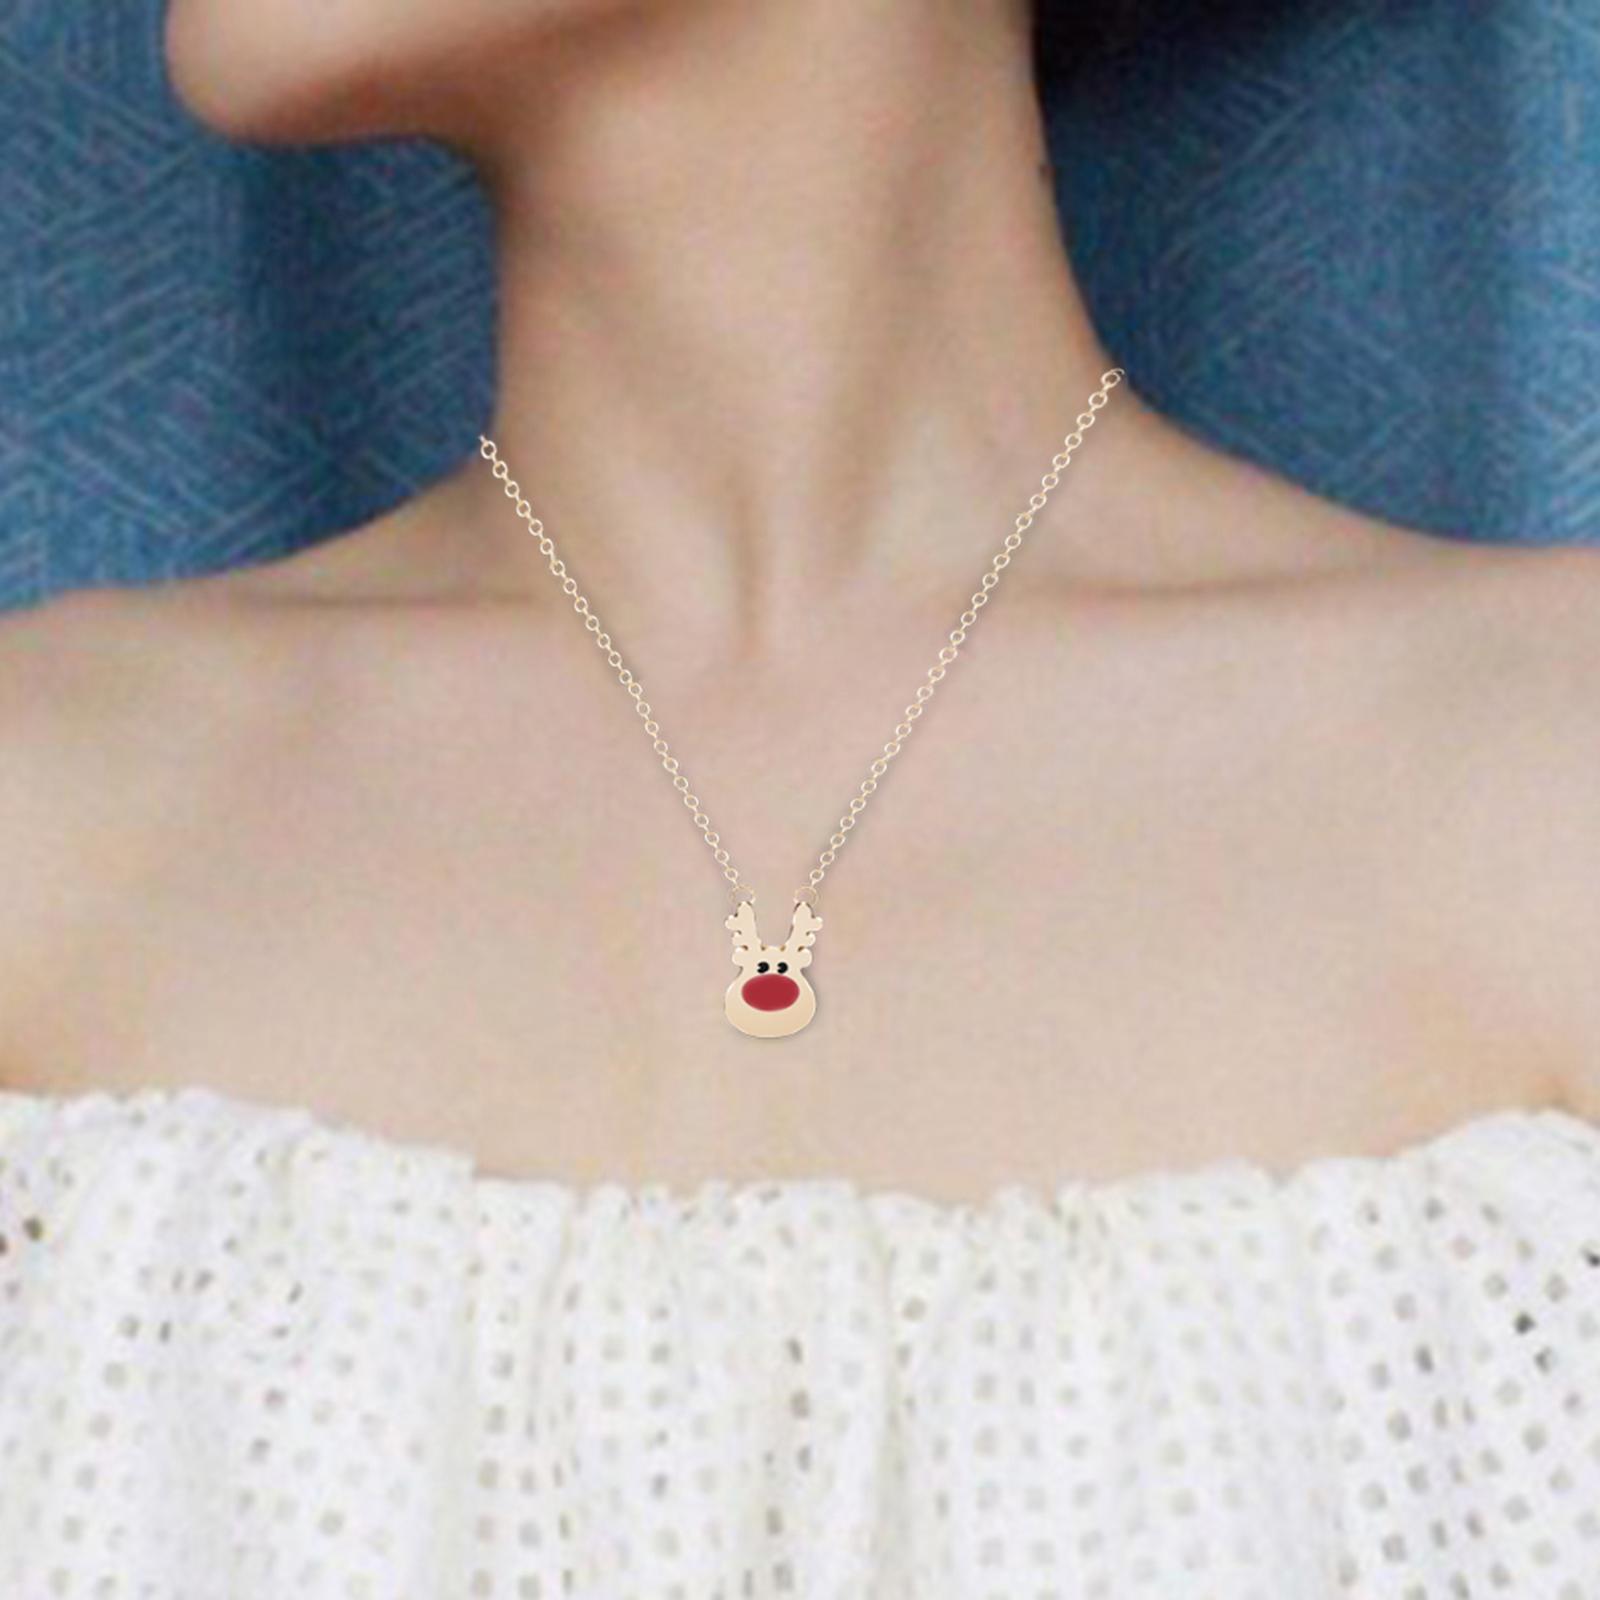 Pendant Necklace Luxury Fashion Red Nose Reindeer for Daily Wear Teens Anniversary